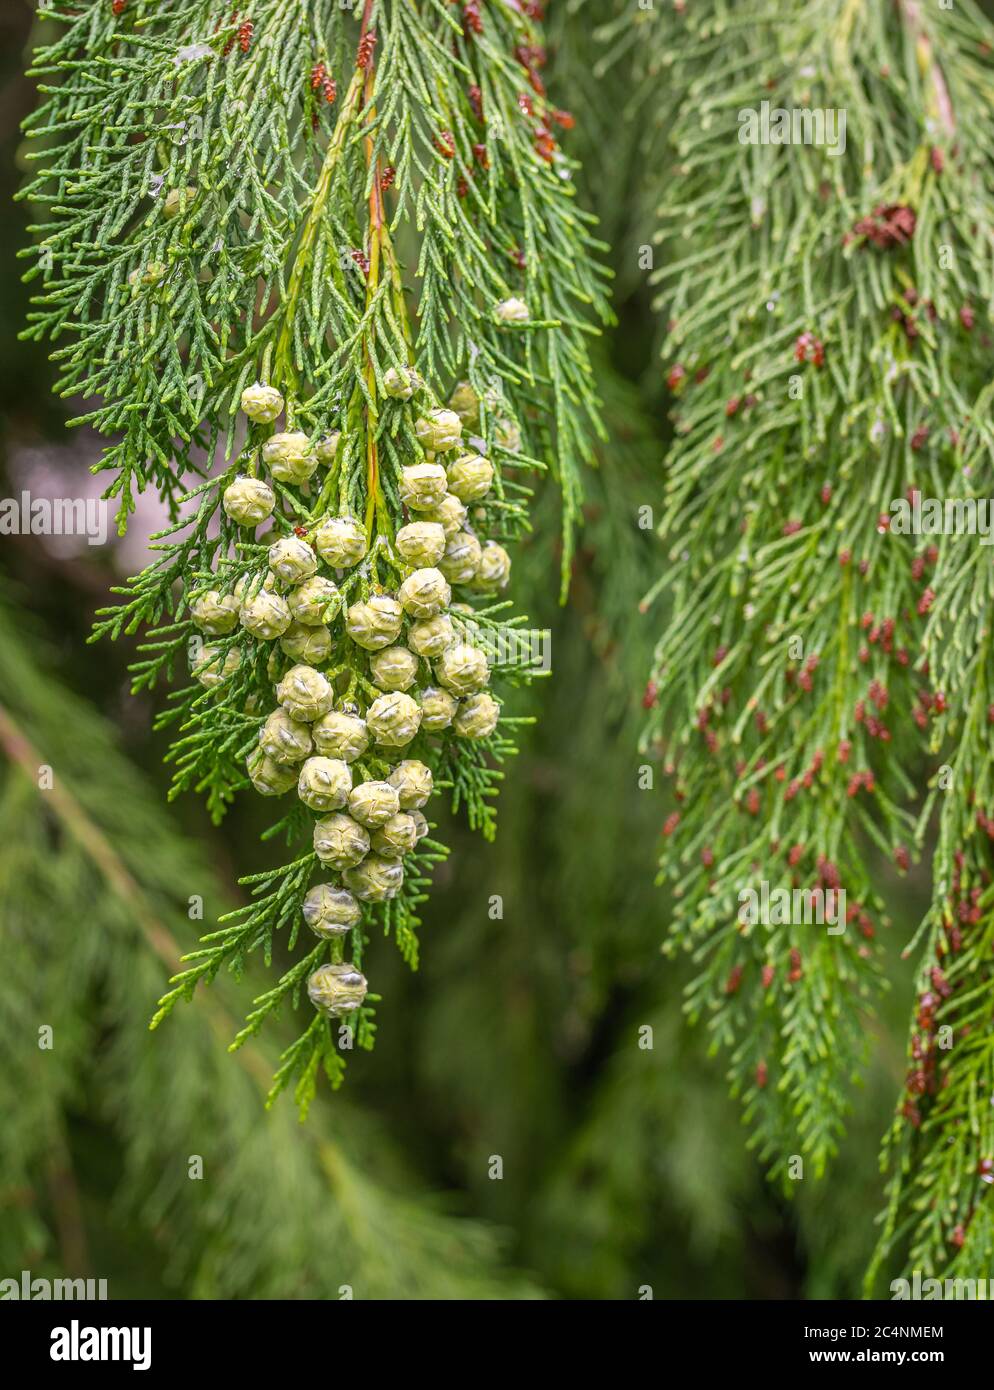 Lawson cypress, Port Orford cedar (Chamaecyparis lawsoniana), branch with mature female cones, South Tyrol, northern Italy Stock Photo